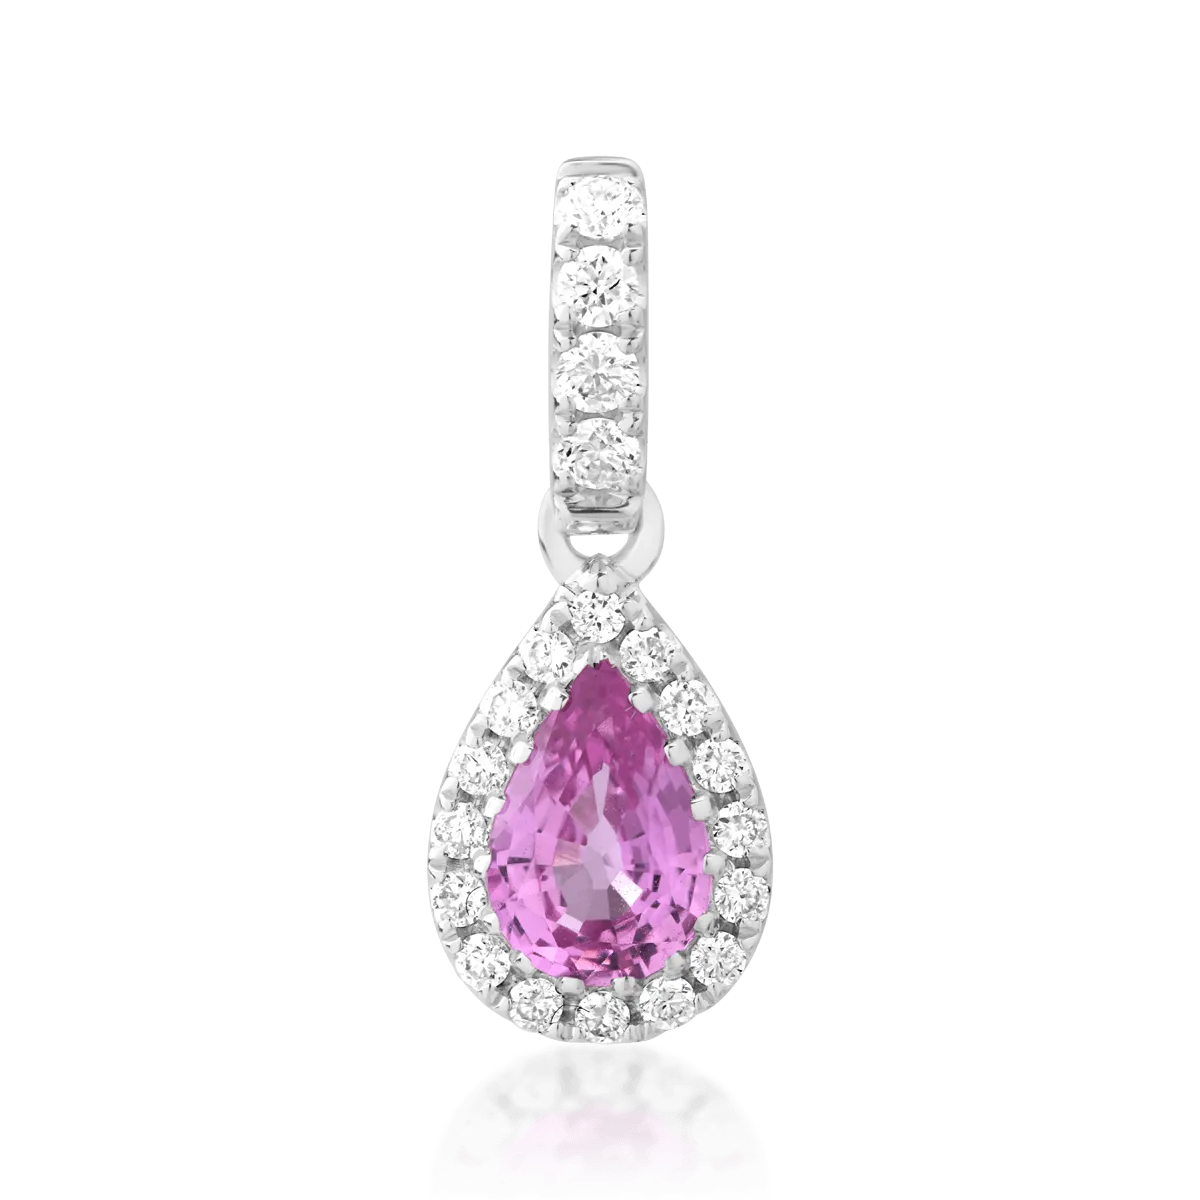 18K white gold pendant with 0.47ct pink sapphire and 0.13ct diamonds